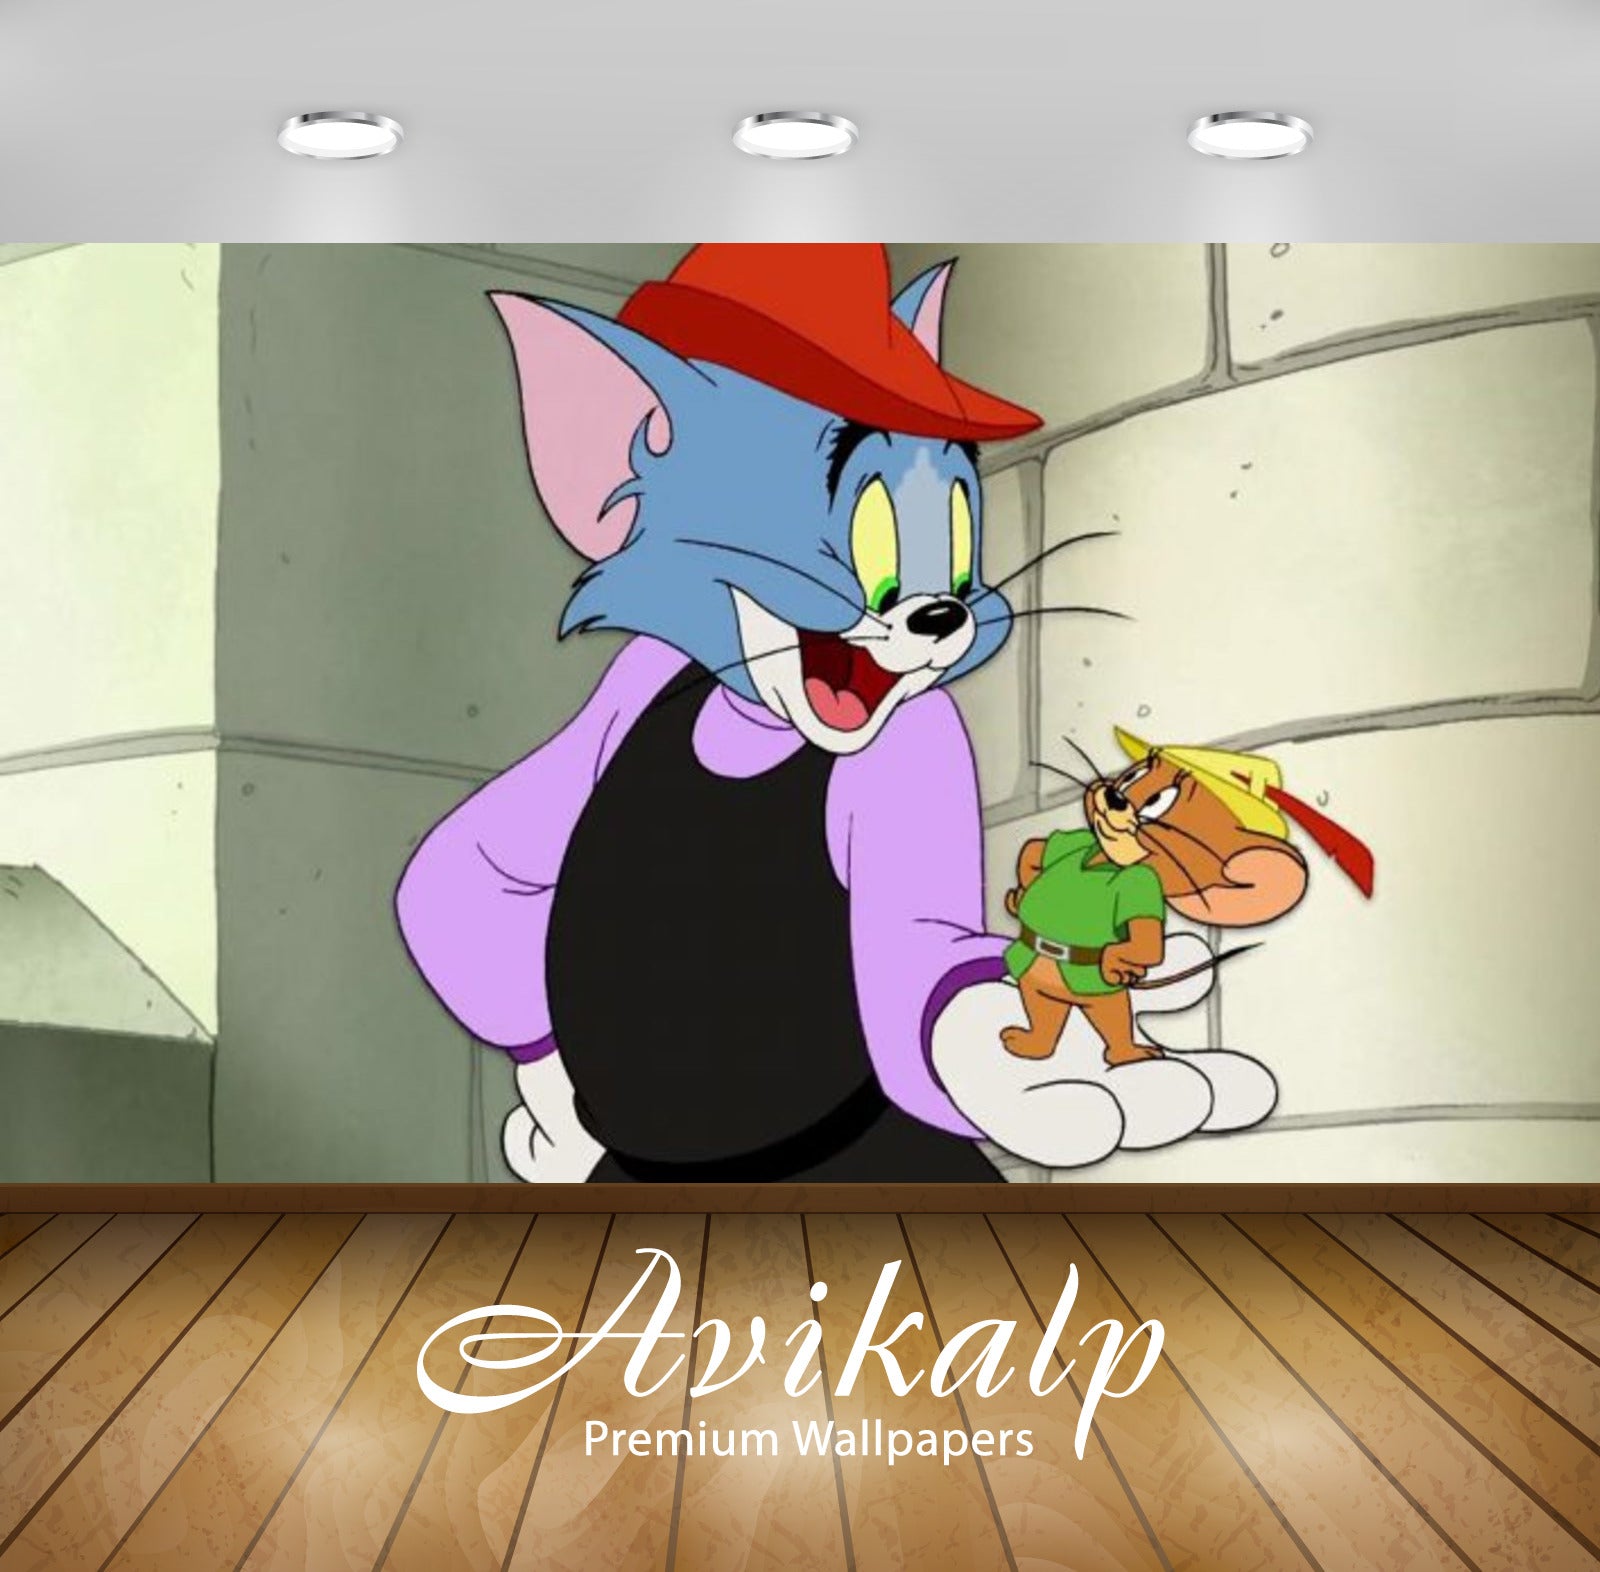 Avikalp Exclusive Awi2281 Tom and Jerry Tales of Robin Hood Full HD Wallpapers for Living room, Hall